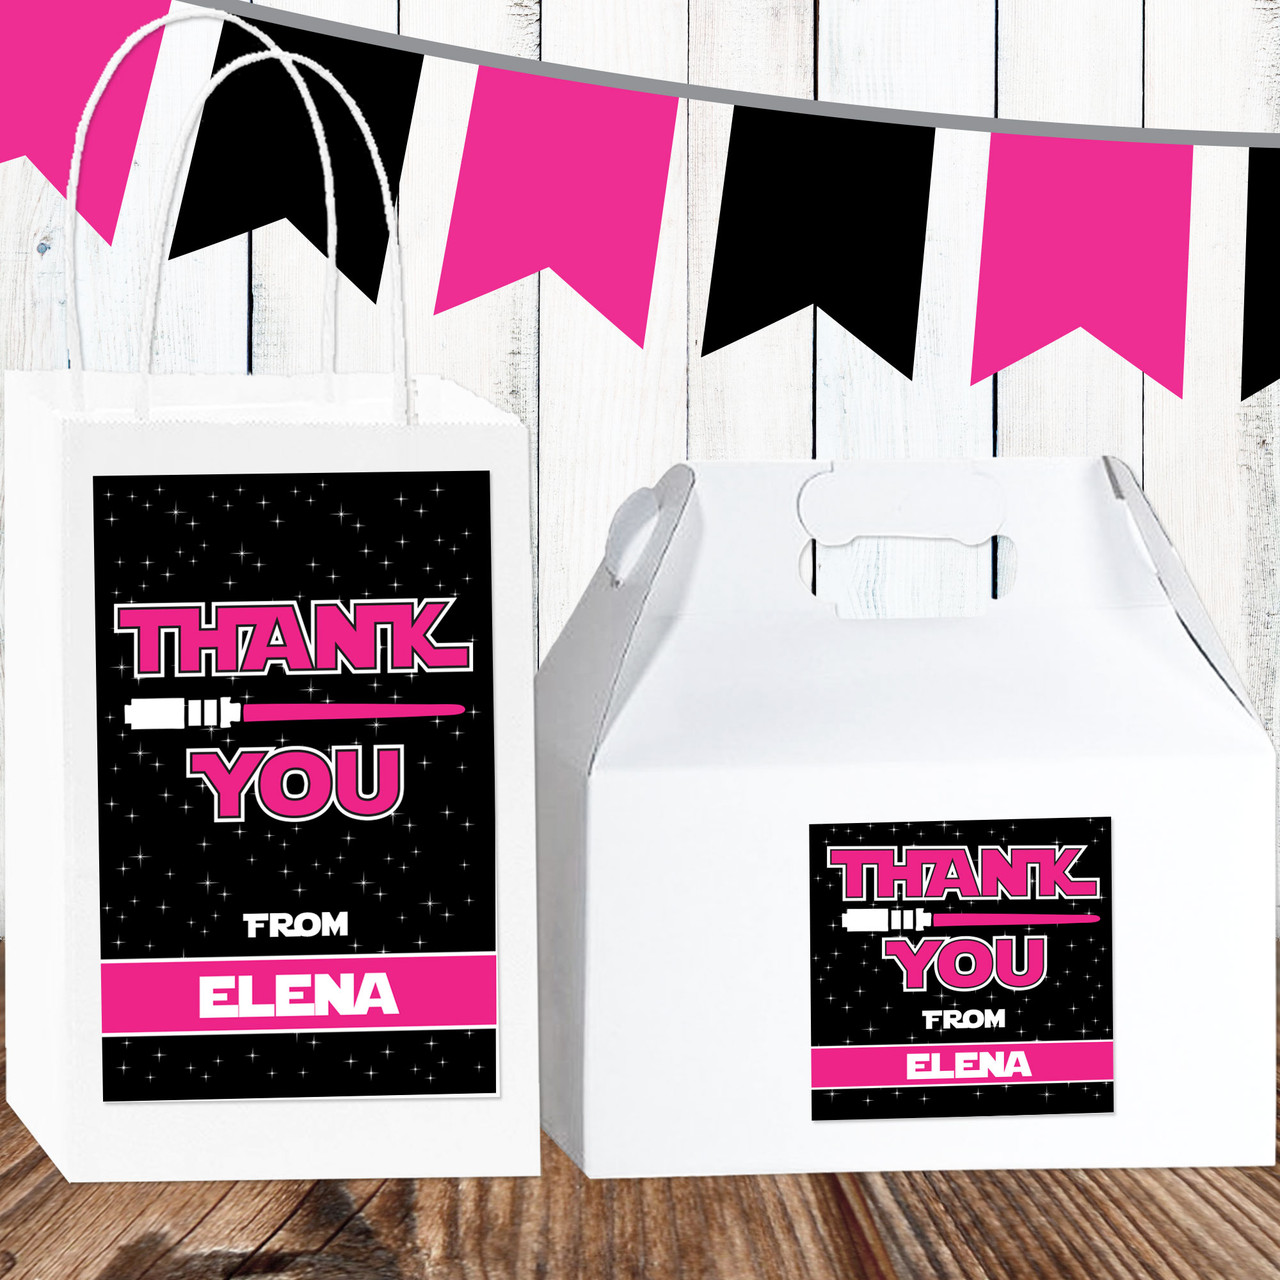 Personalized Graduation Small Cello Party Favor Bags